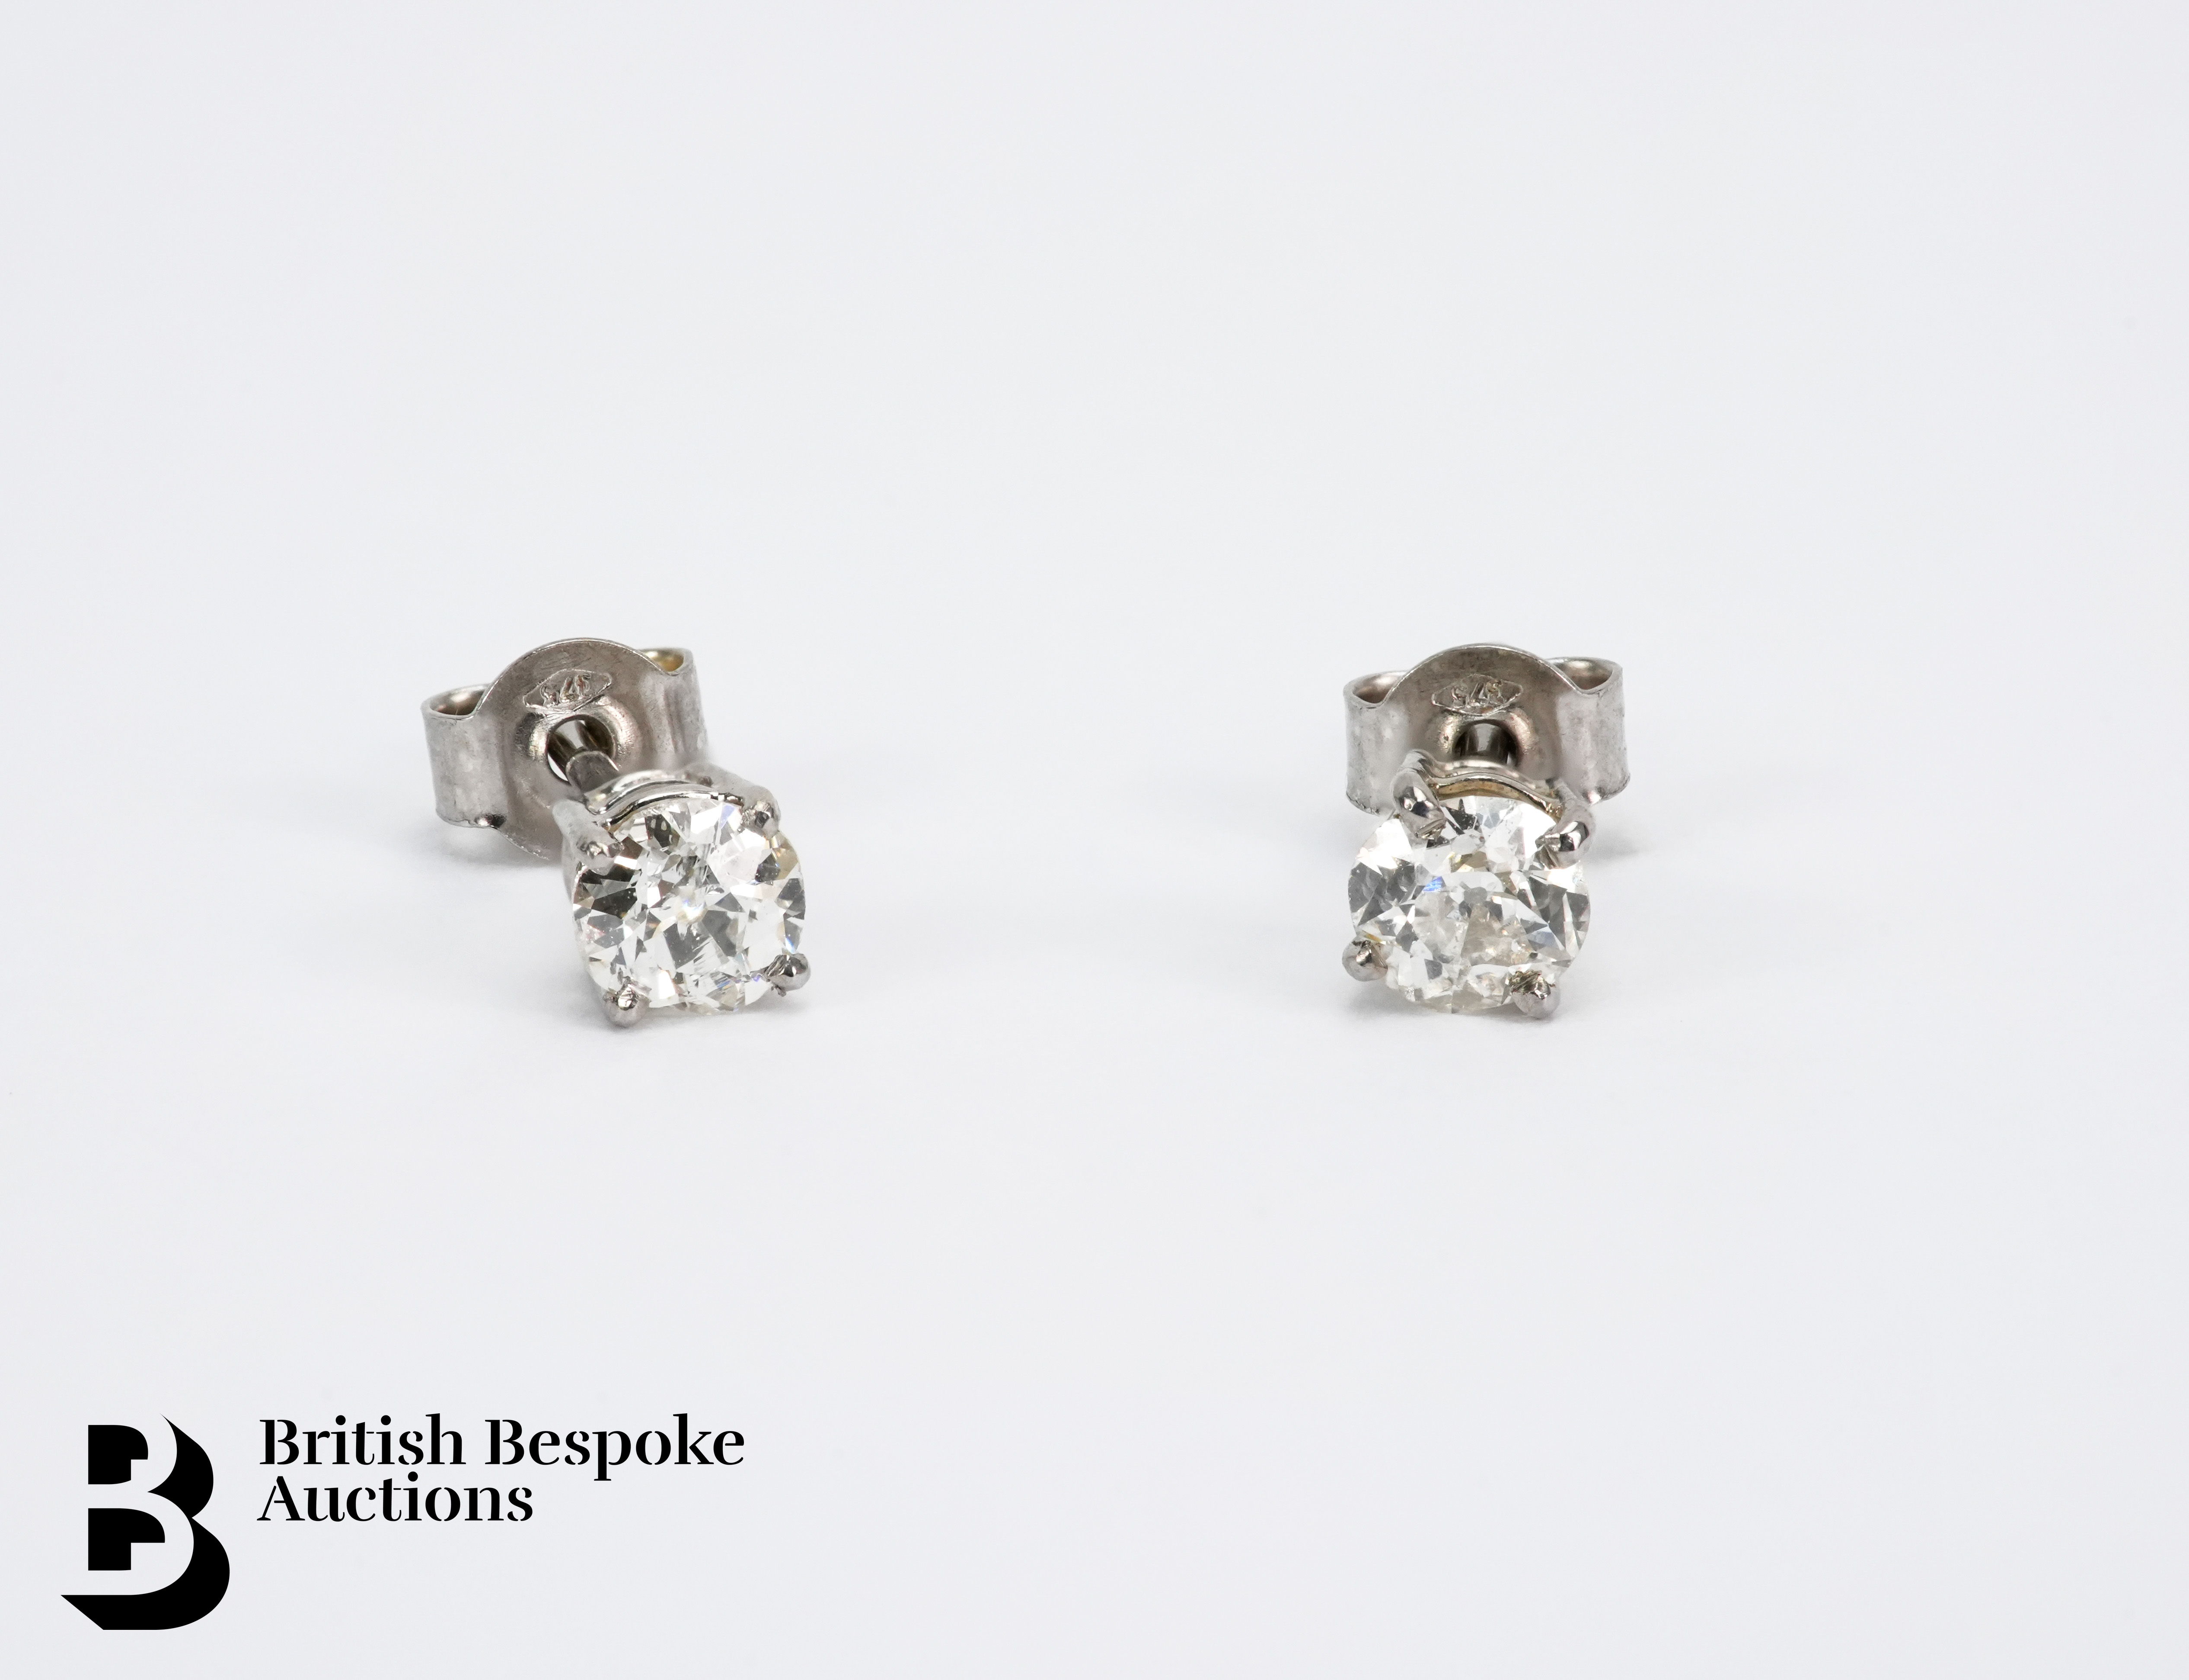 Pair of 18ct White Gold Diamond Solitaire Ear Studs - Image 2 of 2